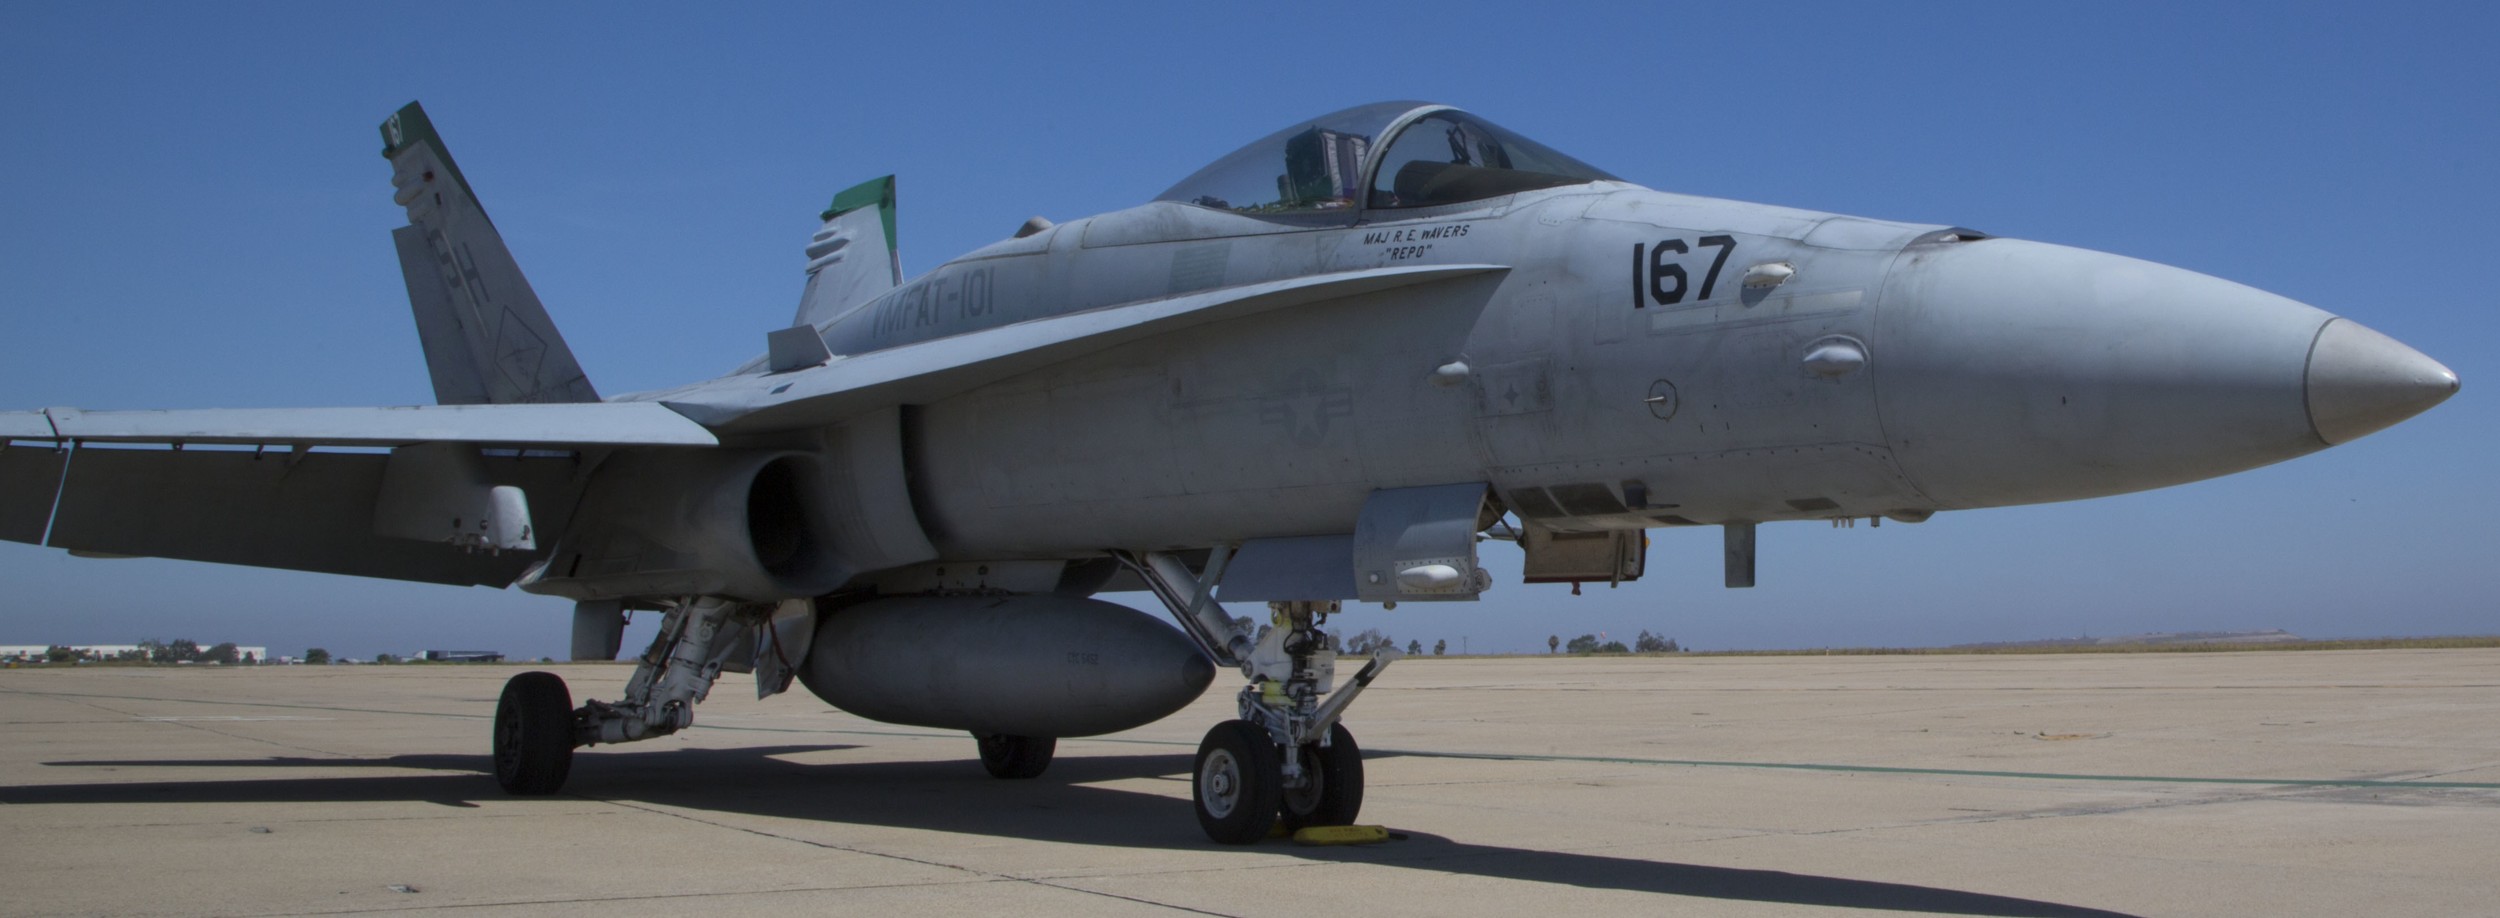 vmfat-101 sharpshooters marine fighter attack training squadron f/a-18c hornet 37